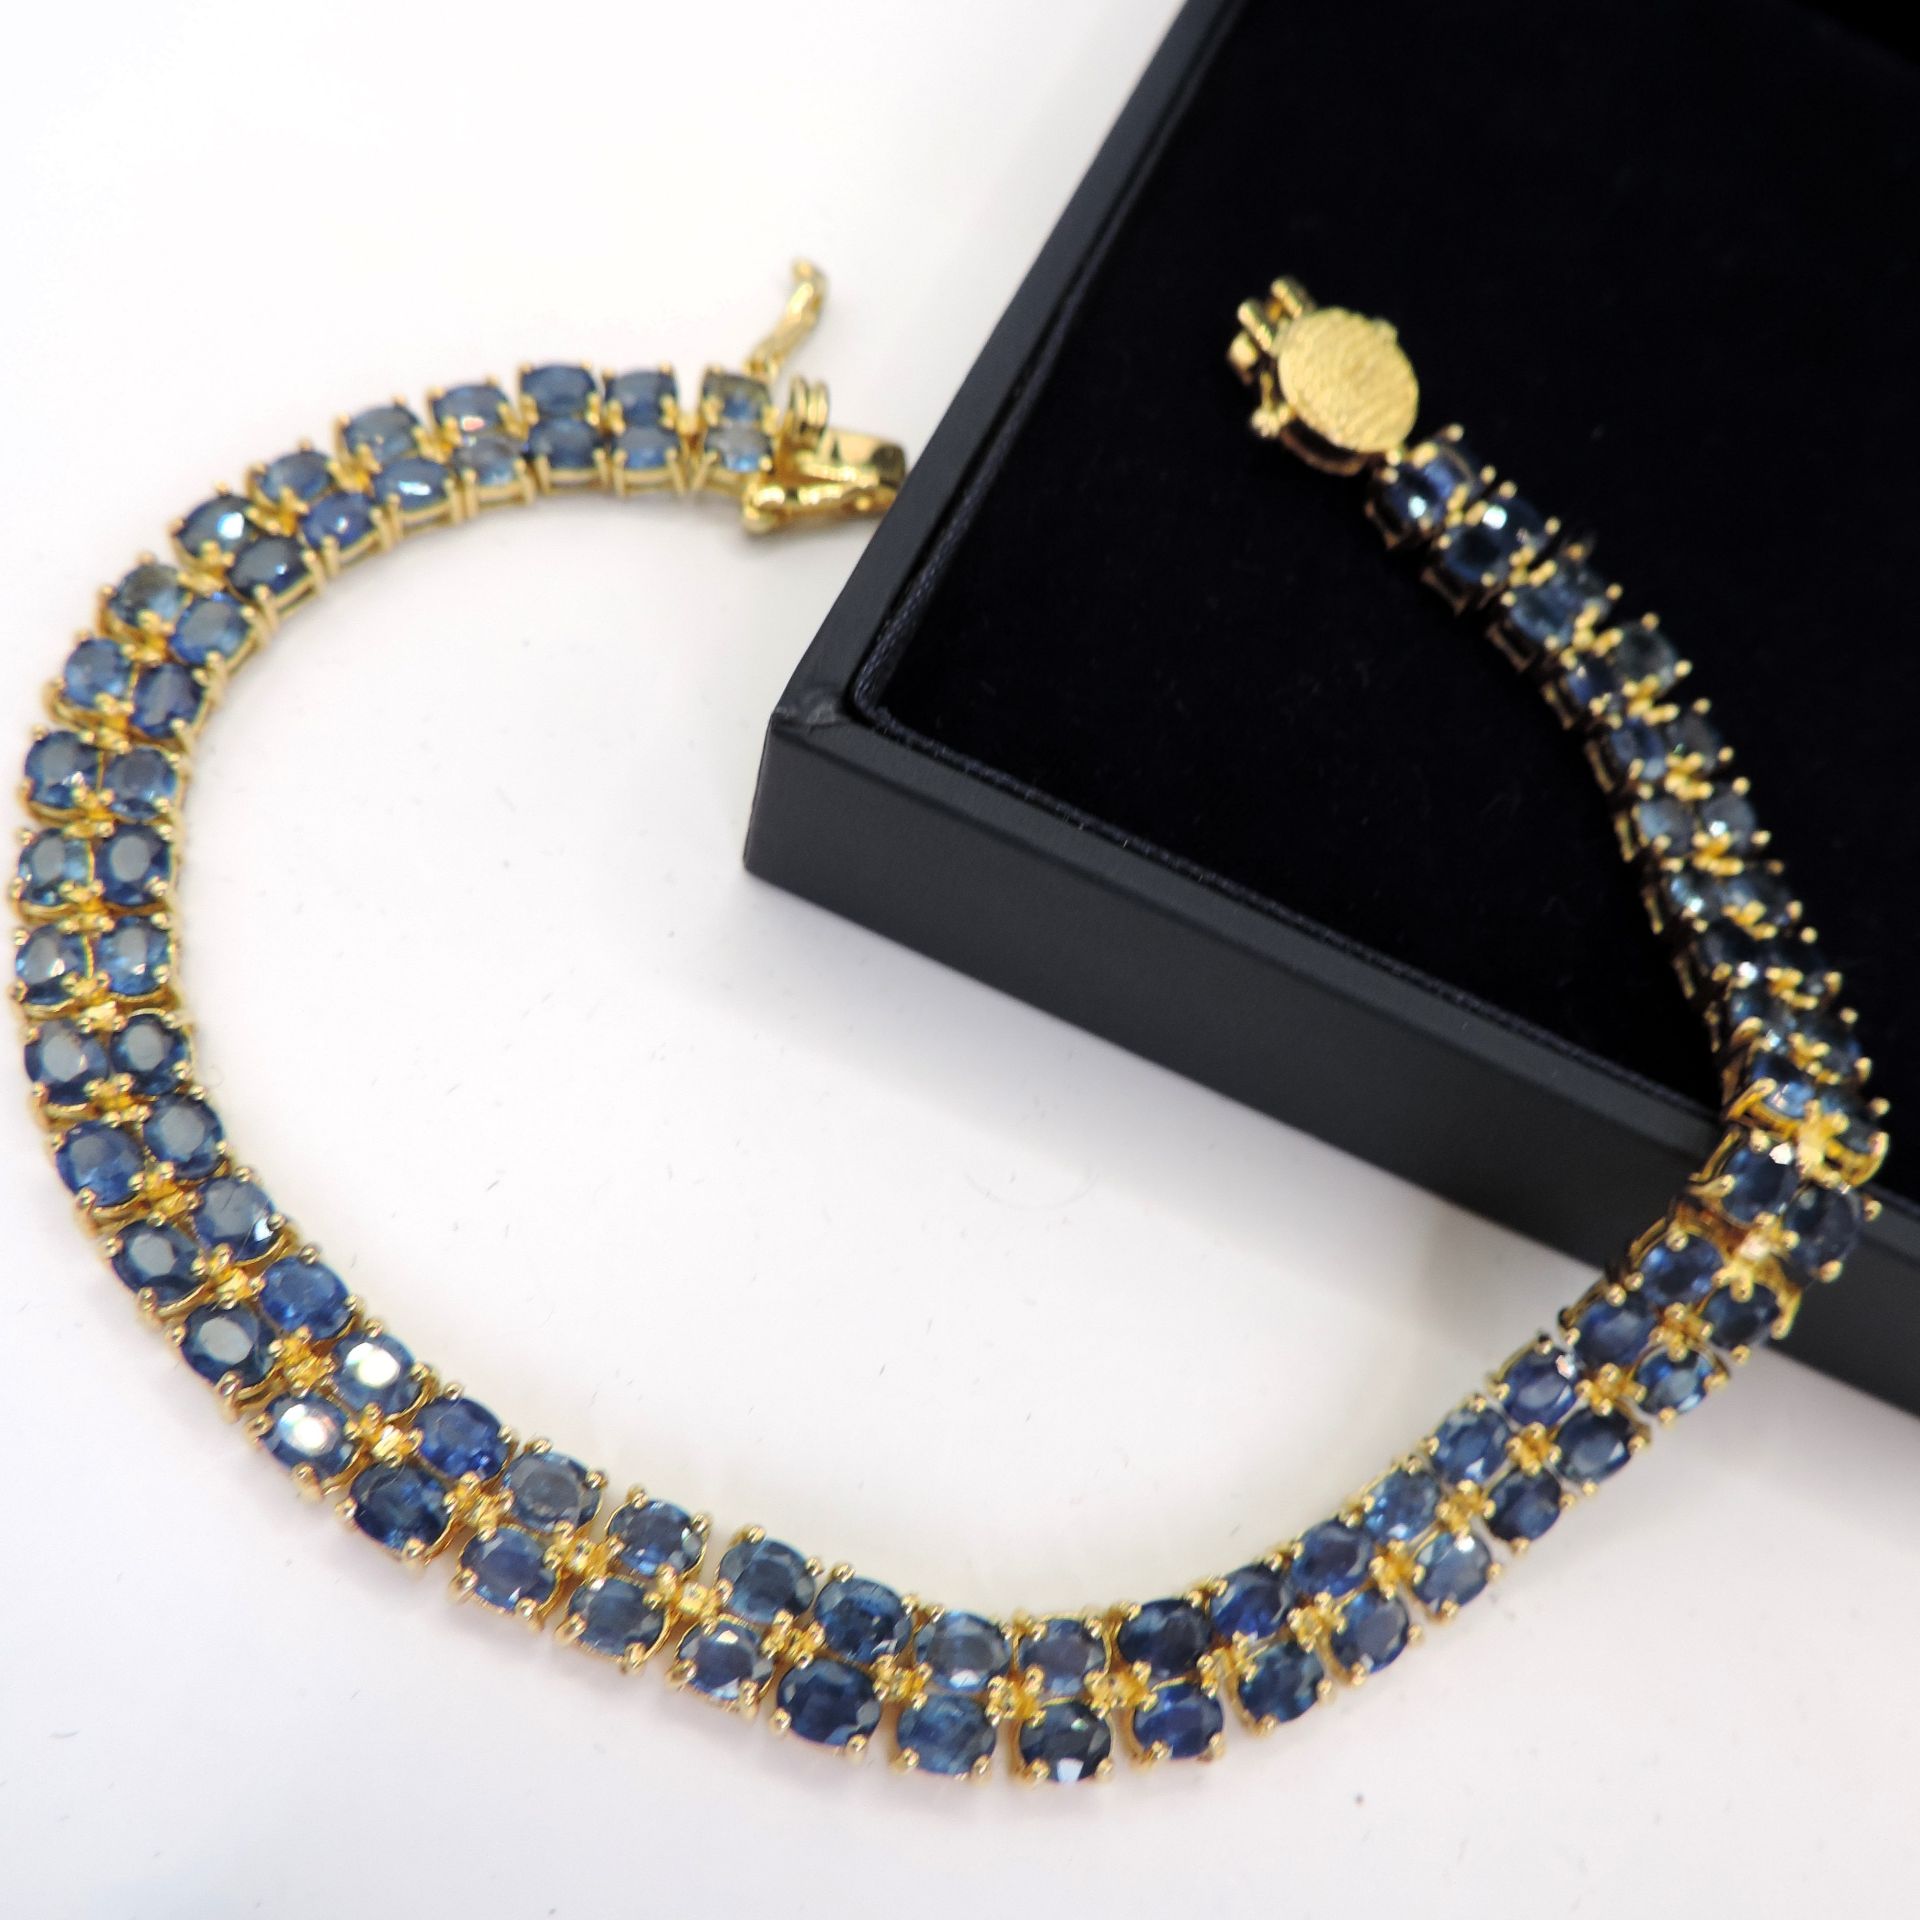 14K Gold on Sterling Silver 21.5CT Sapphire 2 Row Line Bracelet New with Gift Box - Image 3 of 5